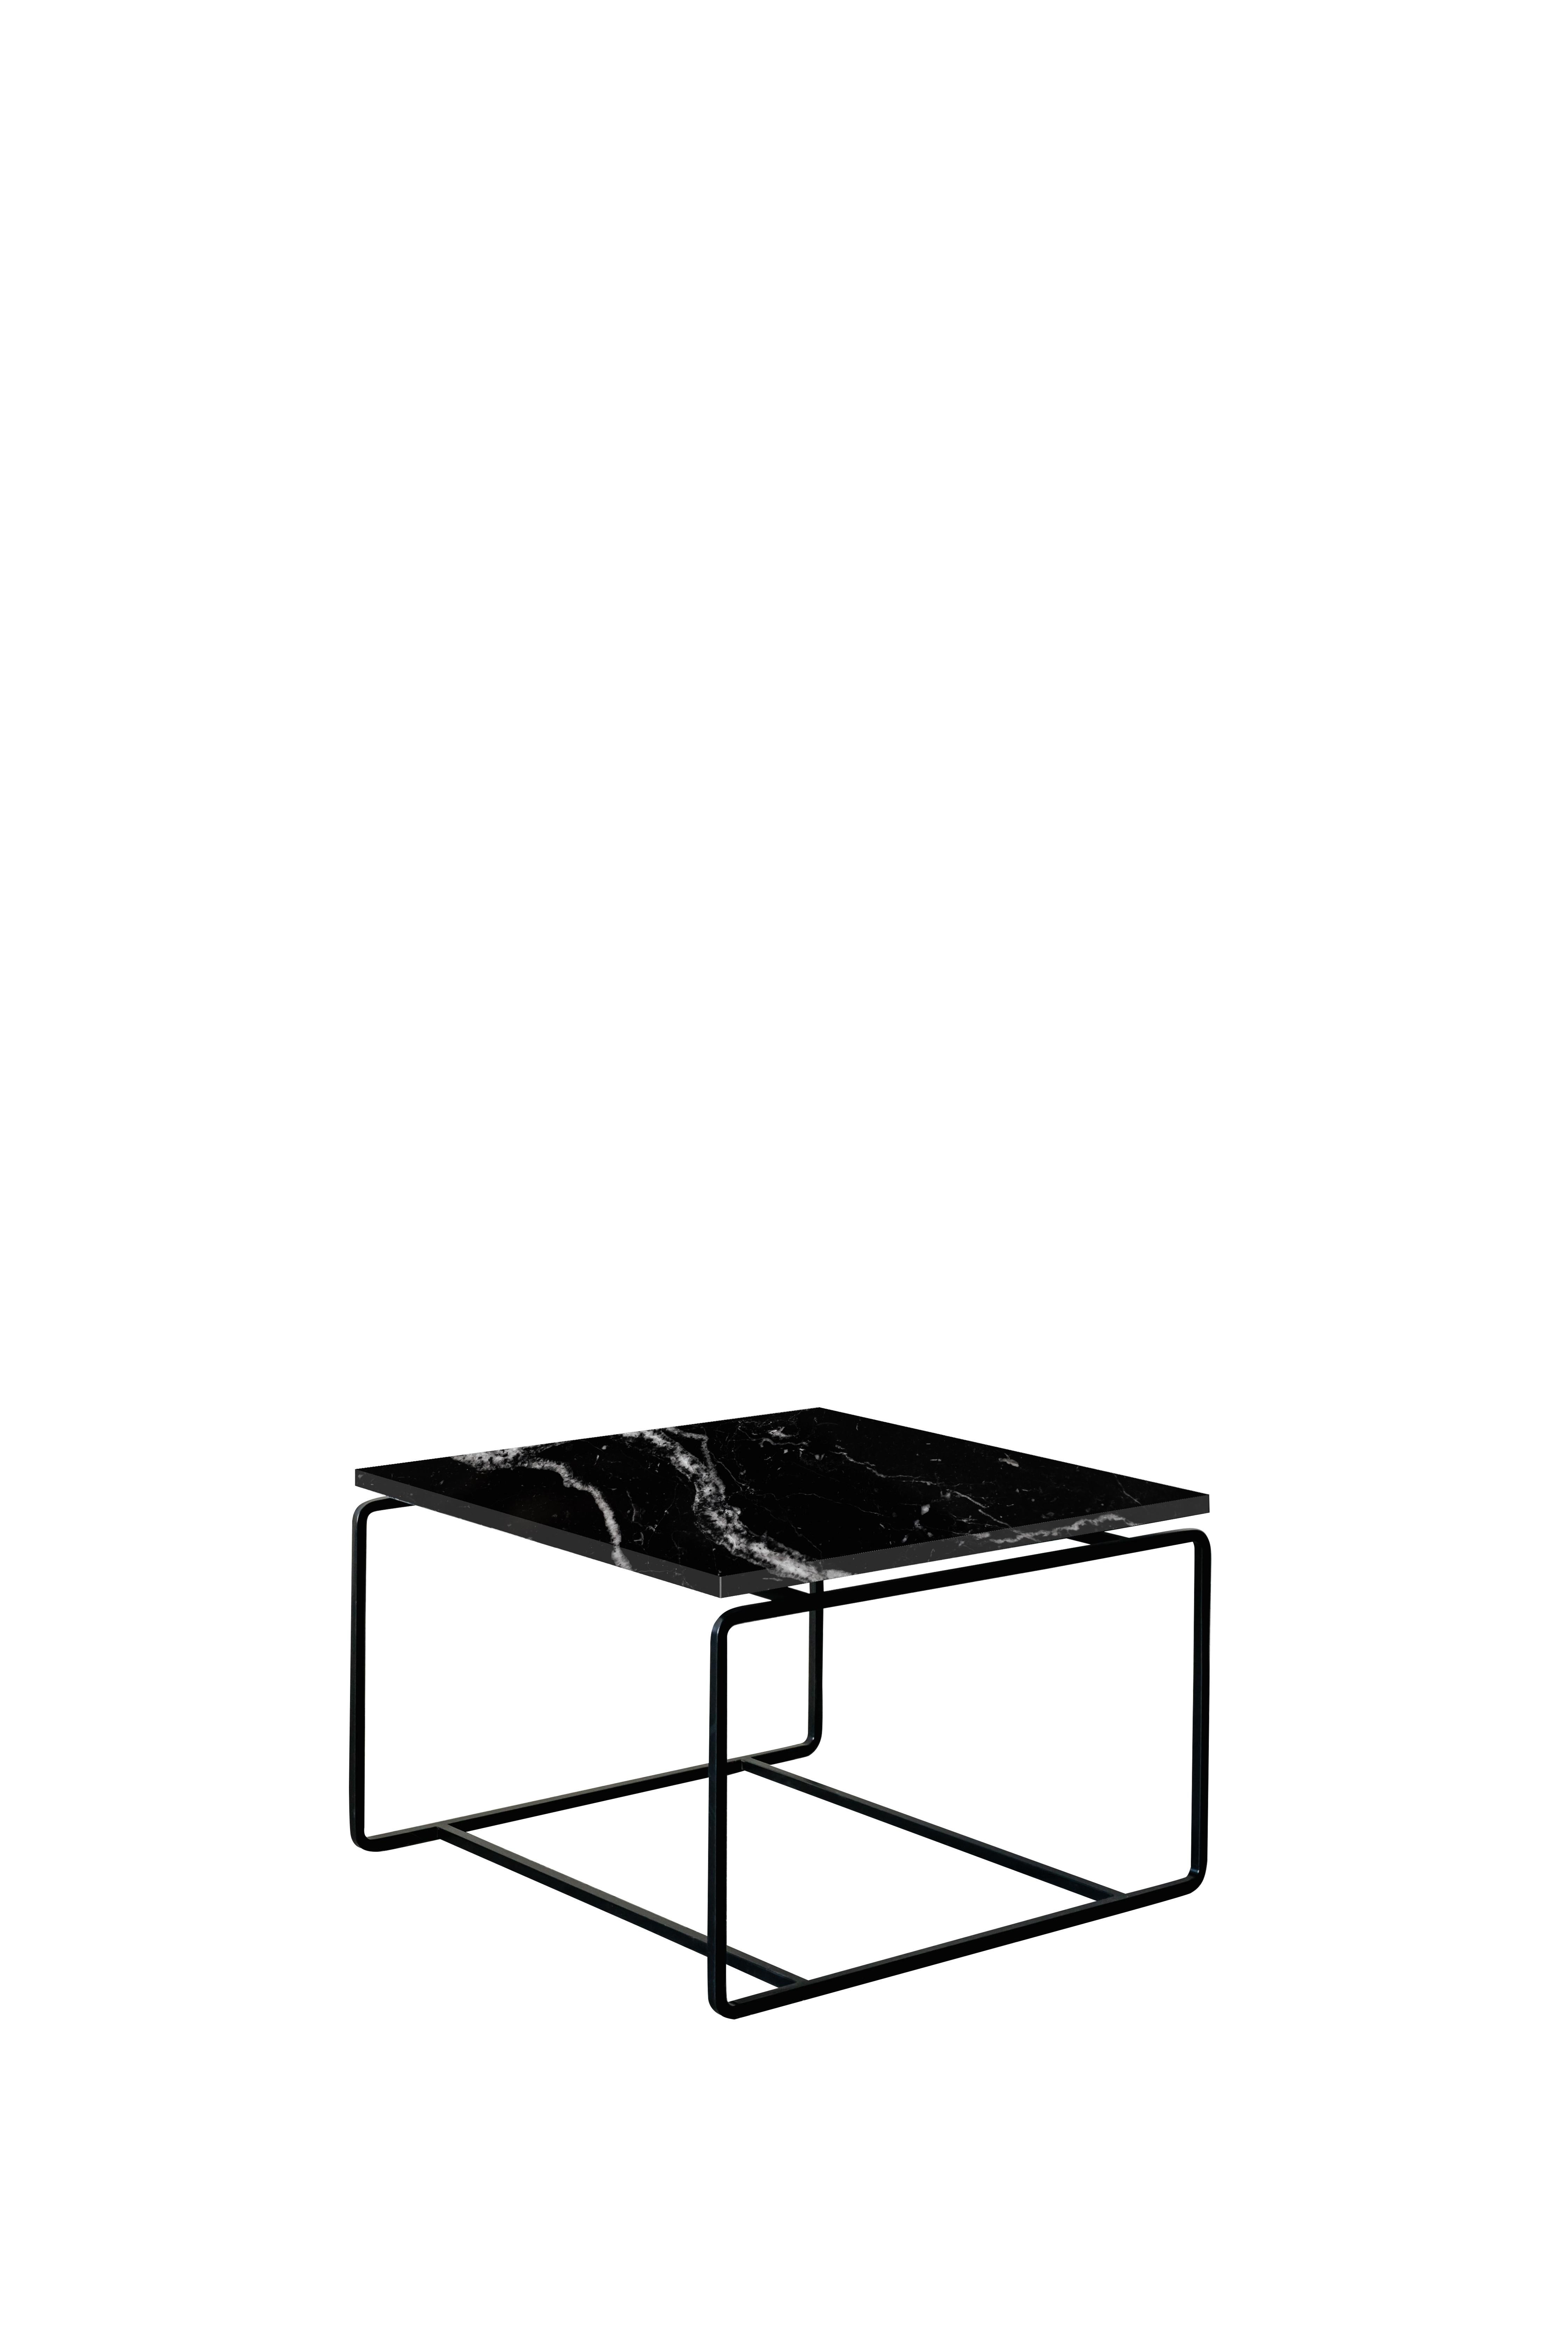 Nero Marquina Form A Coffee Table by Un’common
Dimensions: W 60 x D 60 x H 37 cm
Materials: Marble
Also Available: Other finishes available

FORM is about giving fresh look by rounded corners and lifted marble tops. Every detail matters. In